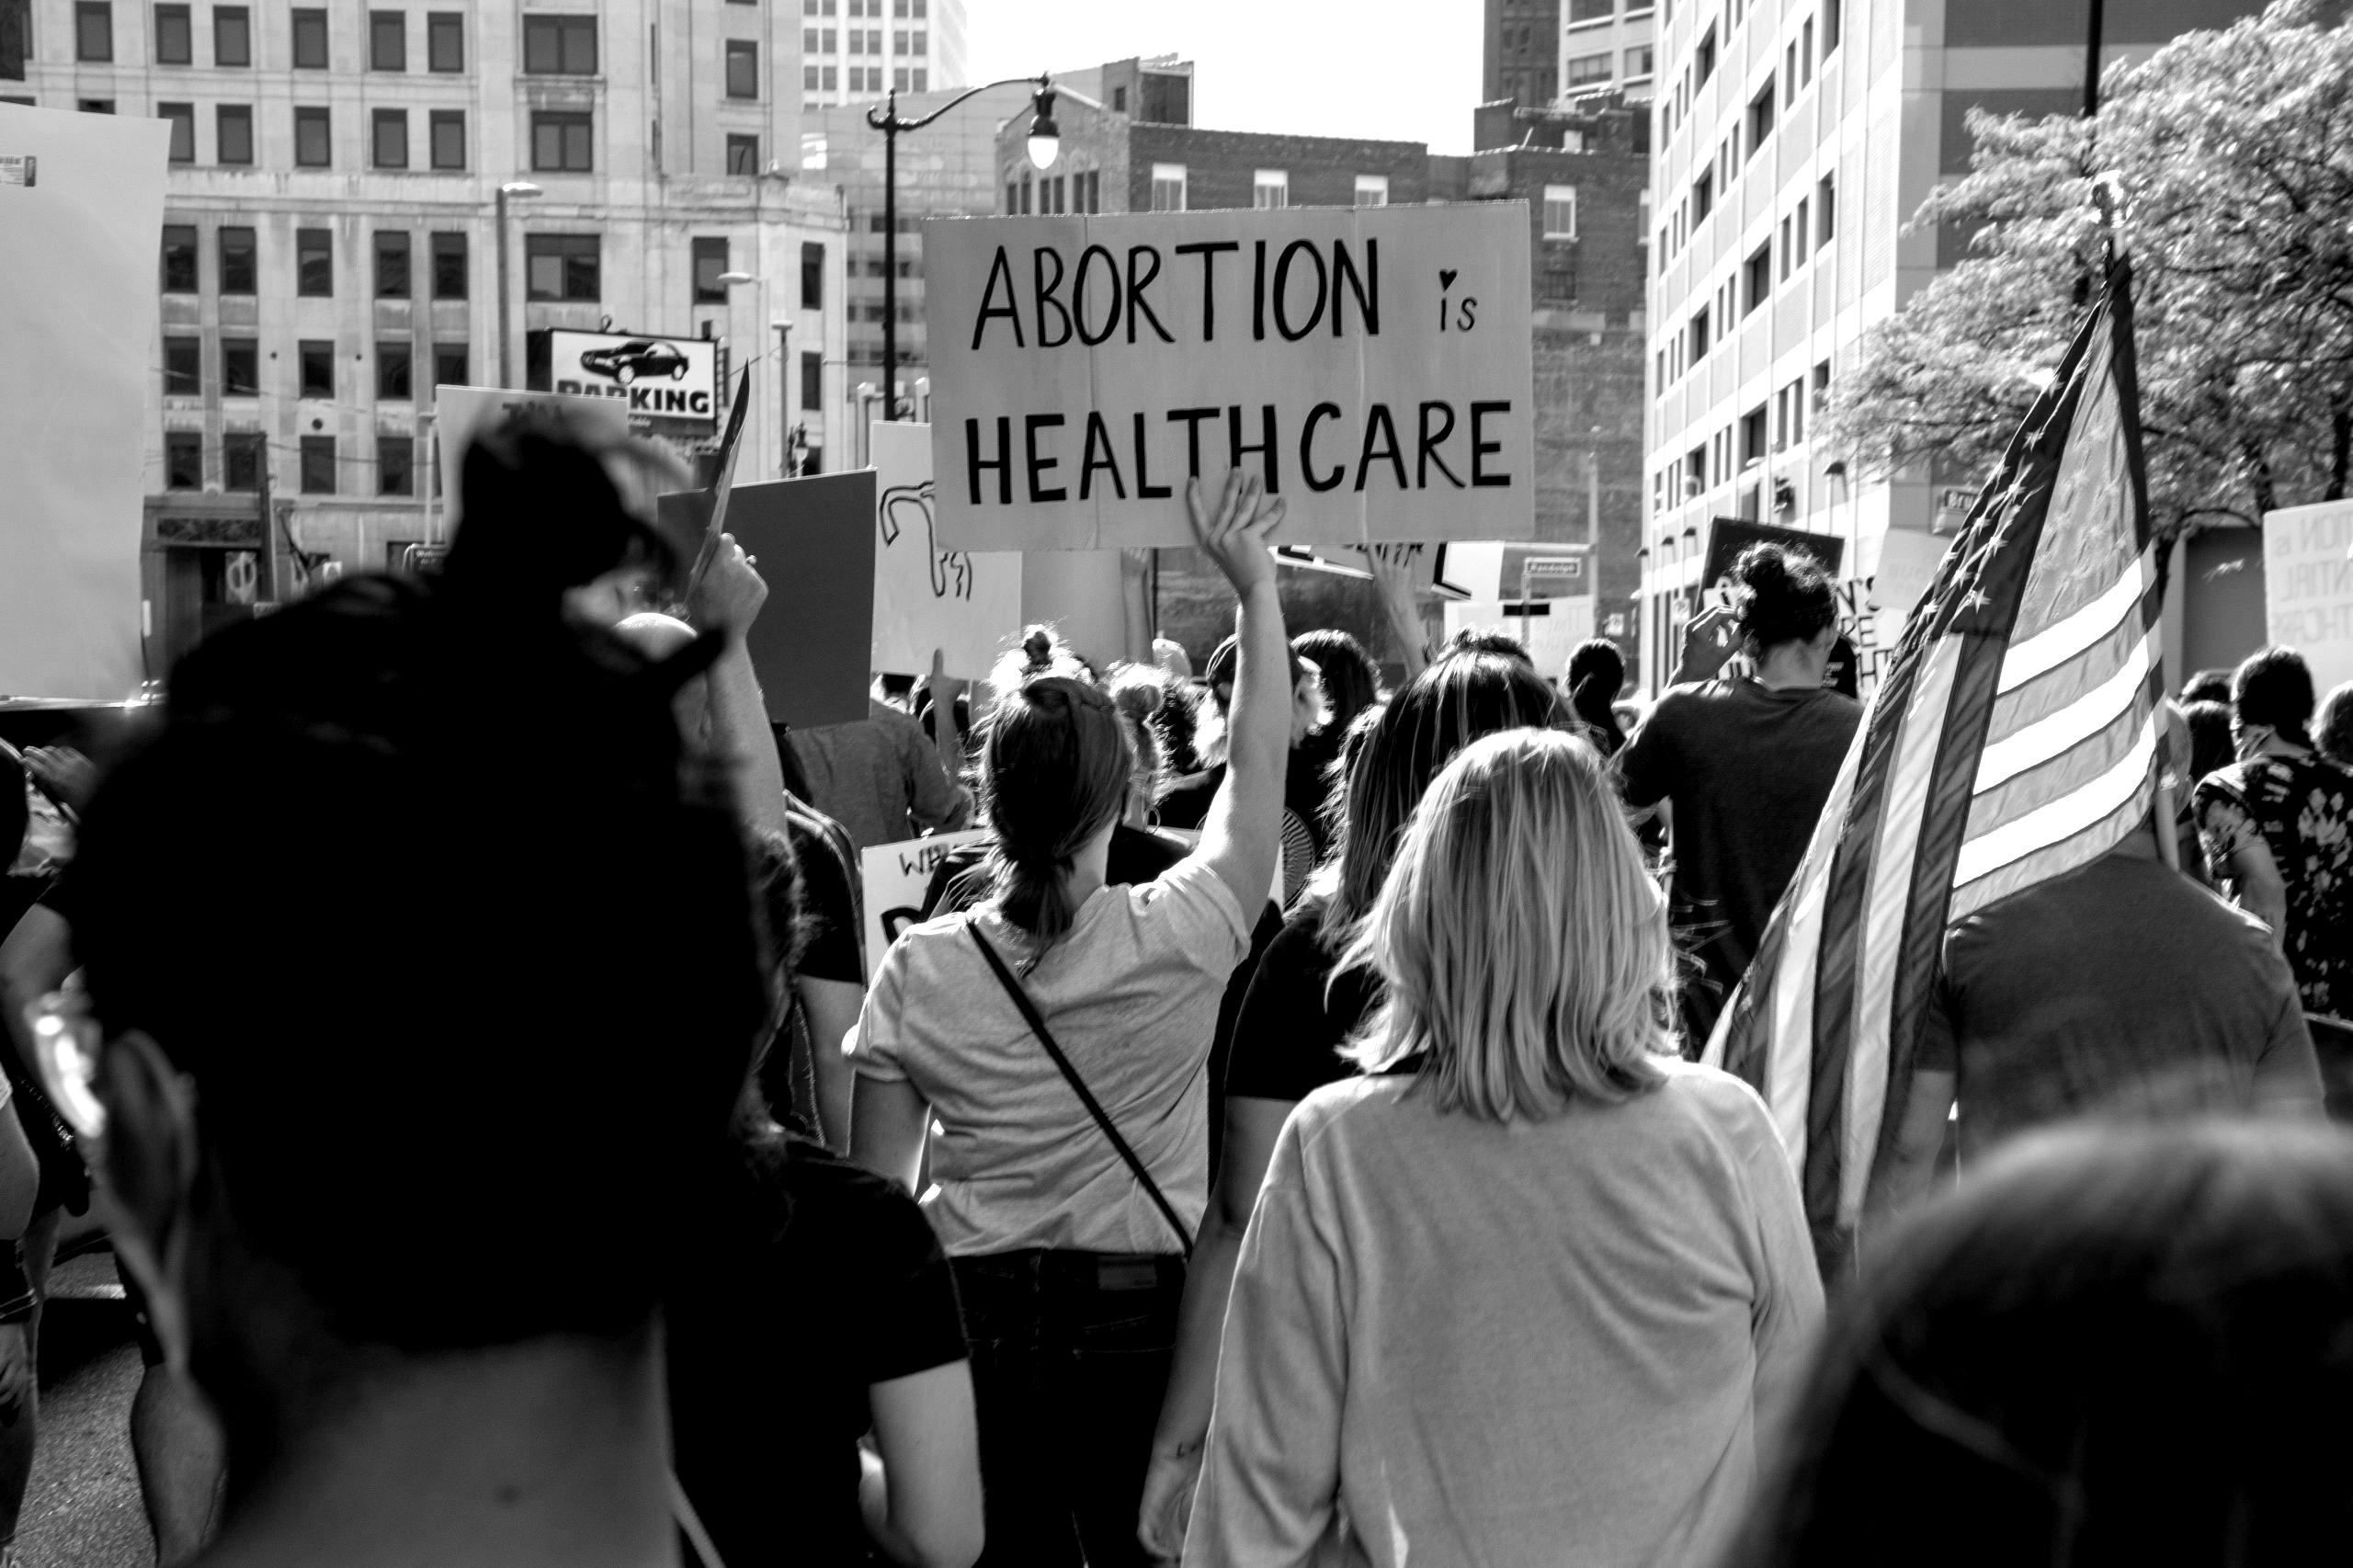 Here’s How Philanthropy Can Protect Access to Abortion in a Post-‘Roe v. Wade’ World